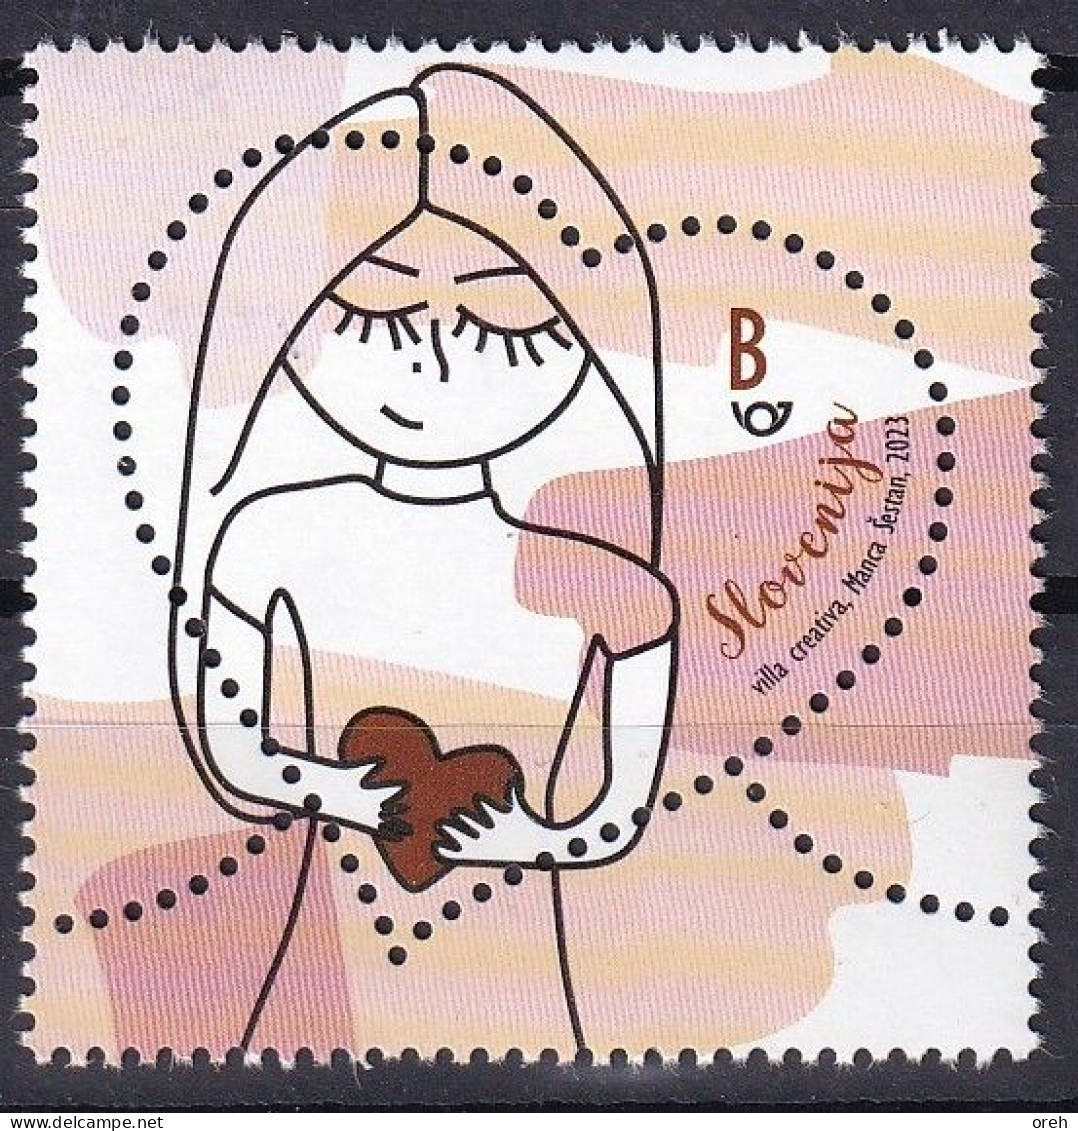 SLOVENIA,SLOWENIEN 2023,LOVE STAMPS,GREETING STAMP,LOVE GIVES BIRTH TO LOVEHEART,,MNH - Slowenien